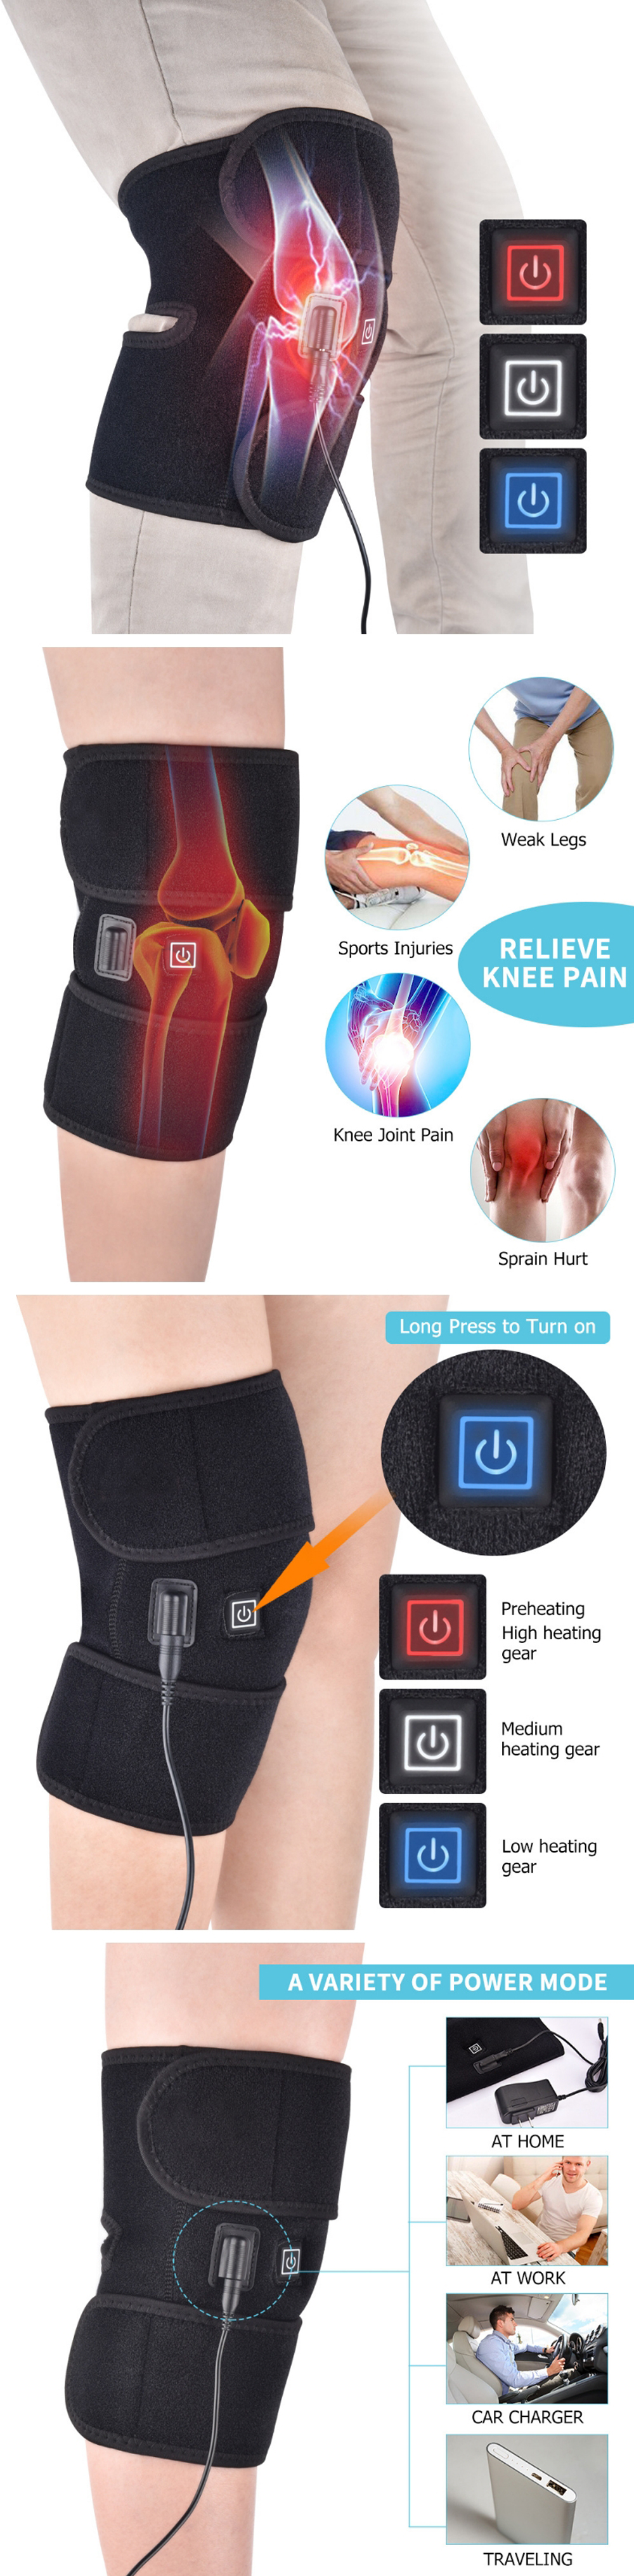 10W-Electric-Far-Infrared-Heating-Knee-Massager-Thermal-Vibration-Physiotherapy-Instrument-Knee-Pad--1923901-1